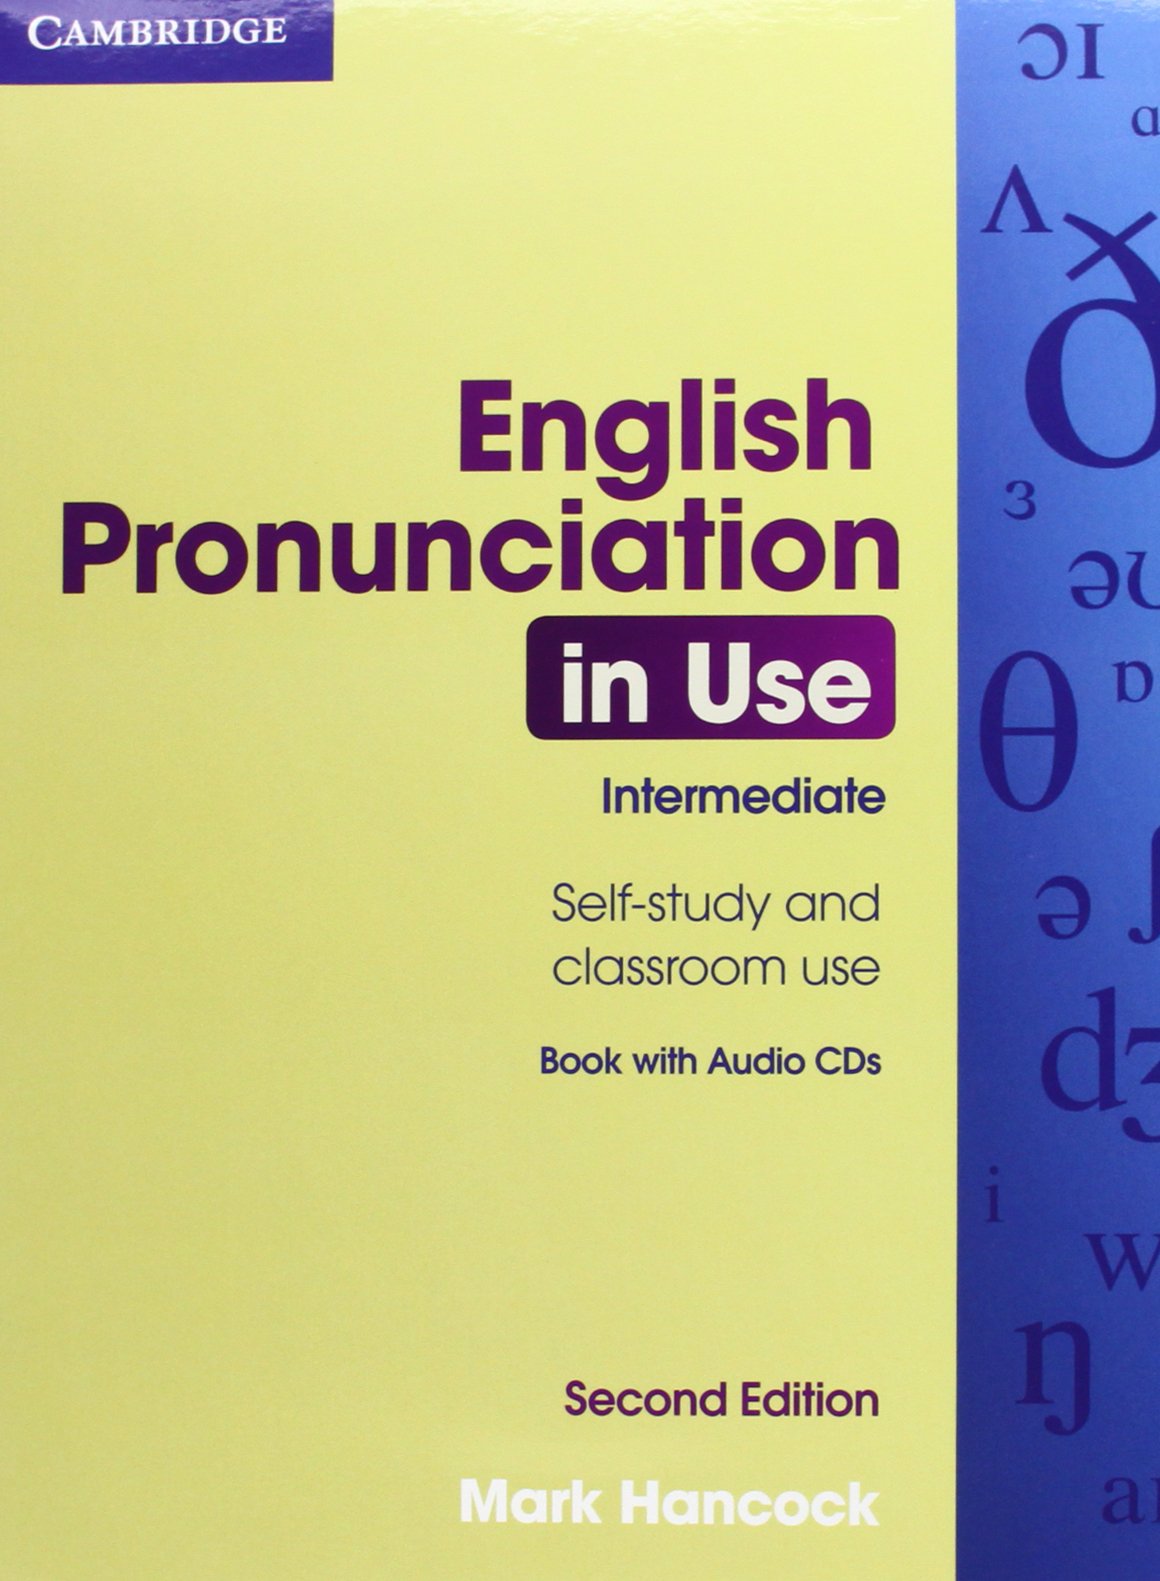 English Pronunciation in Use -anh ngữ Ms Hoa